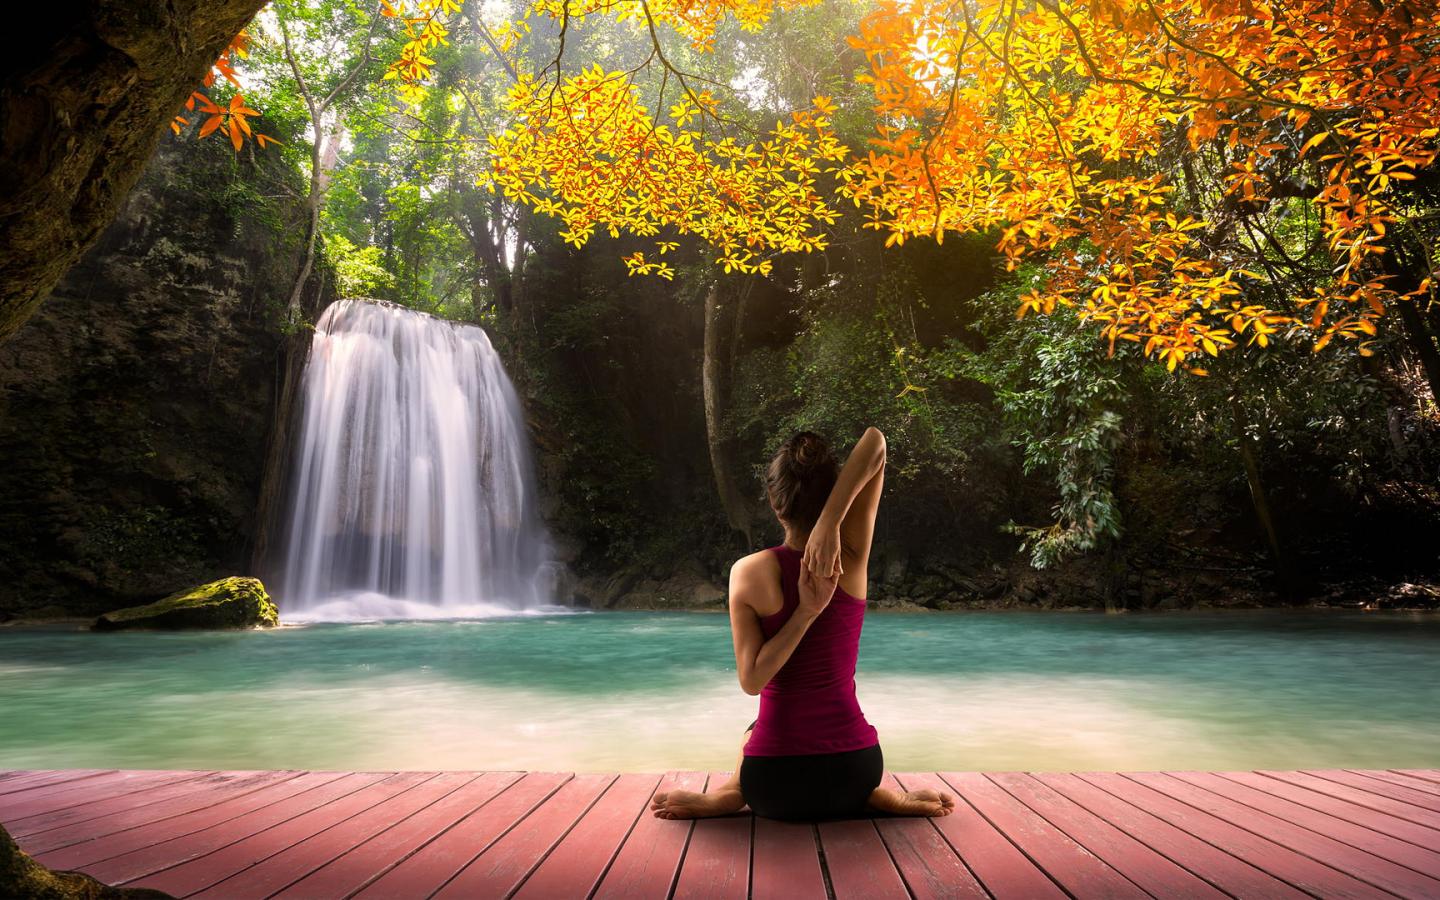 yoga wallpaper,people in nature,nature,natural landscape,water,tree